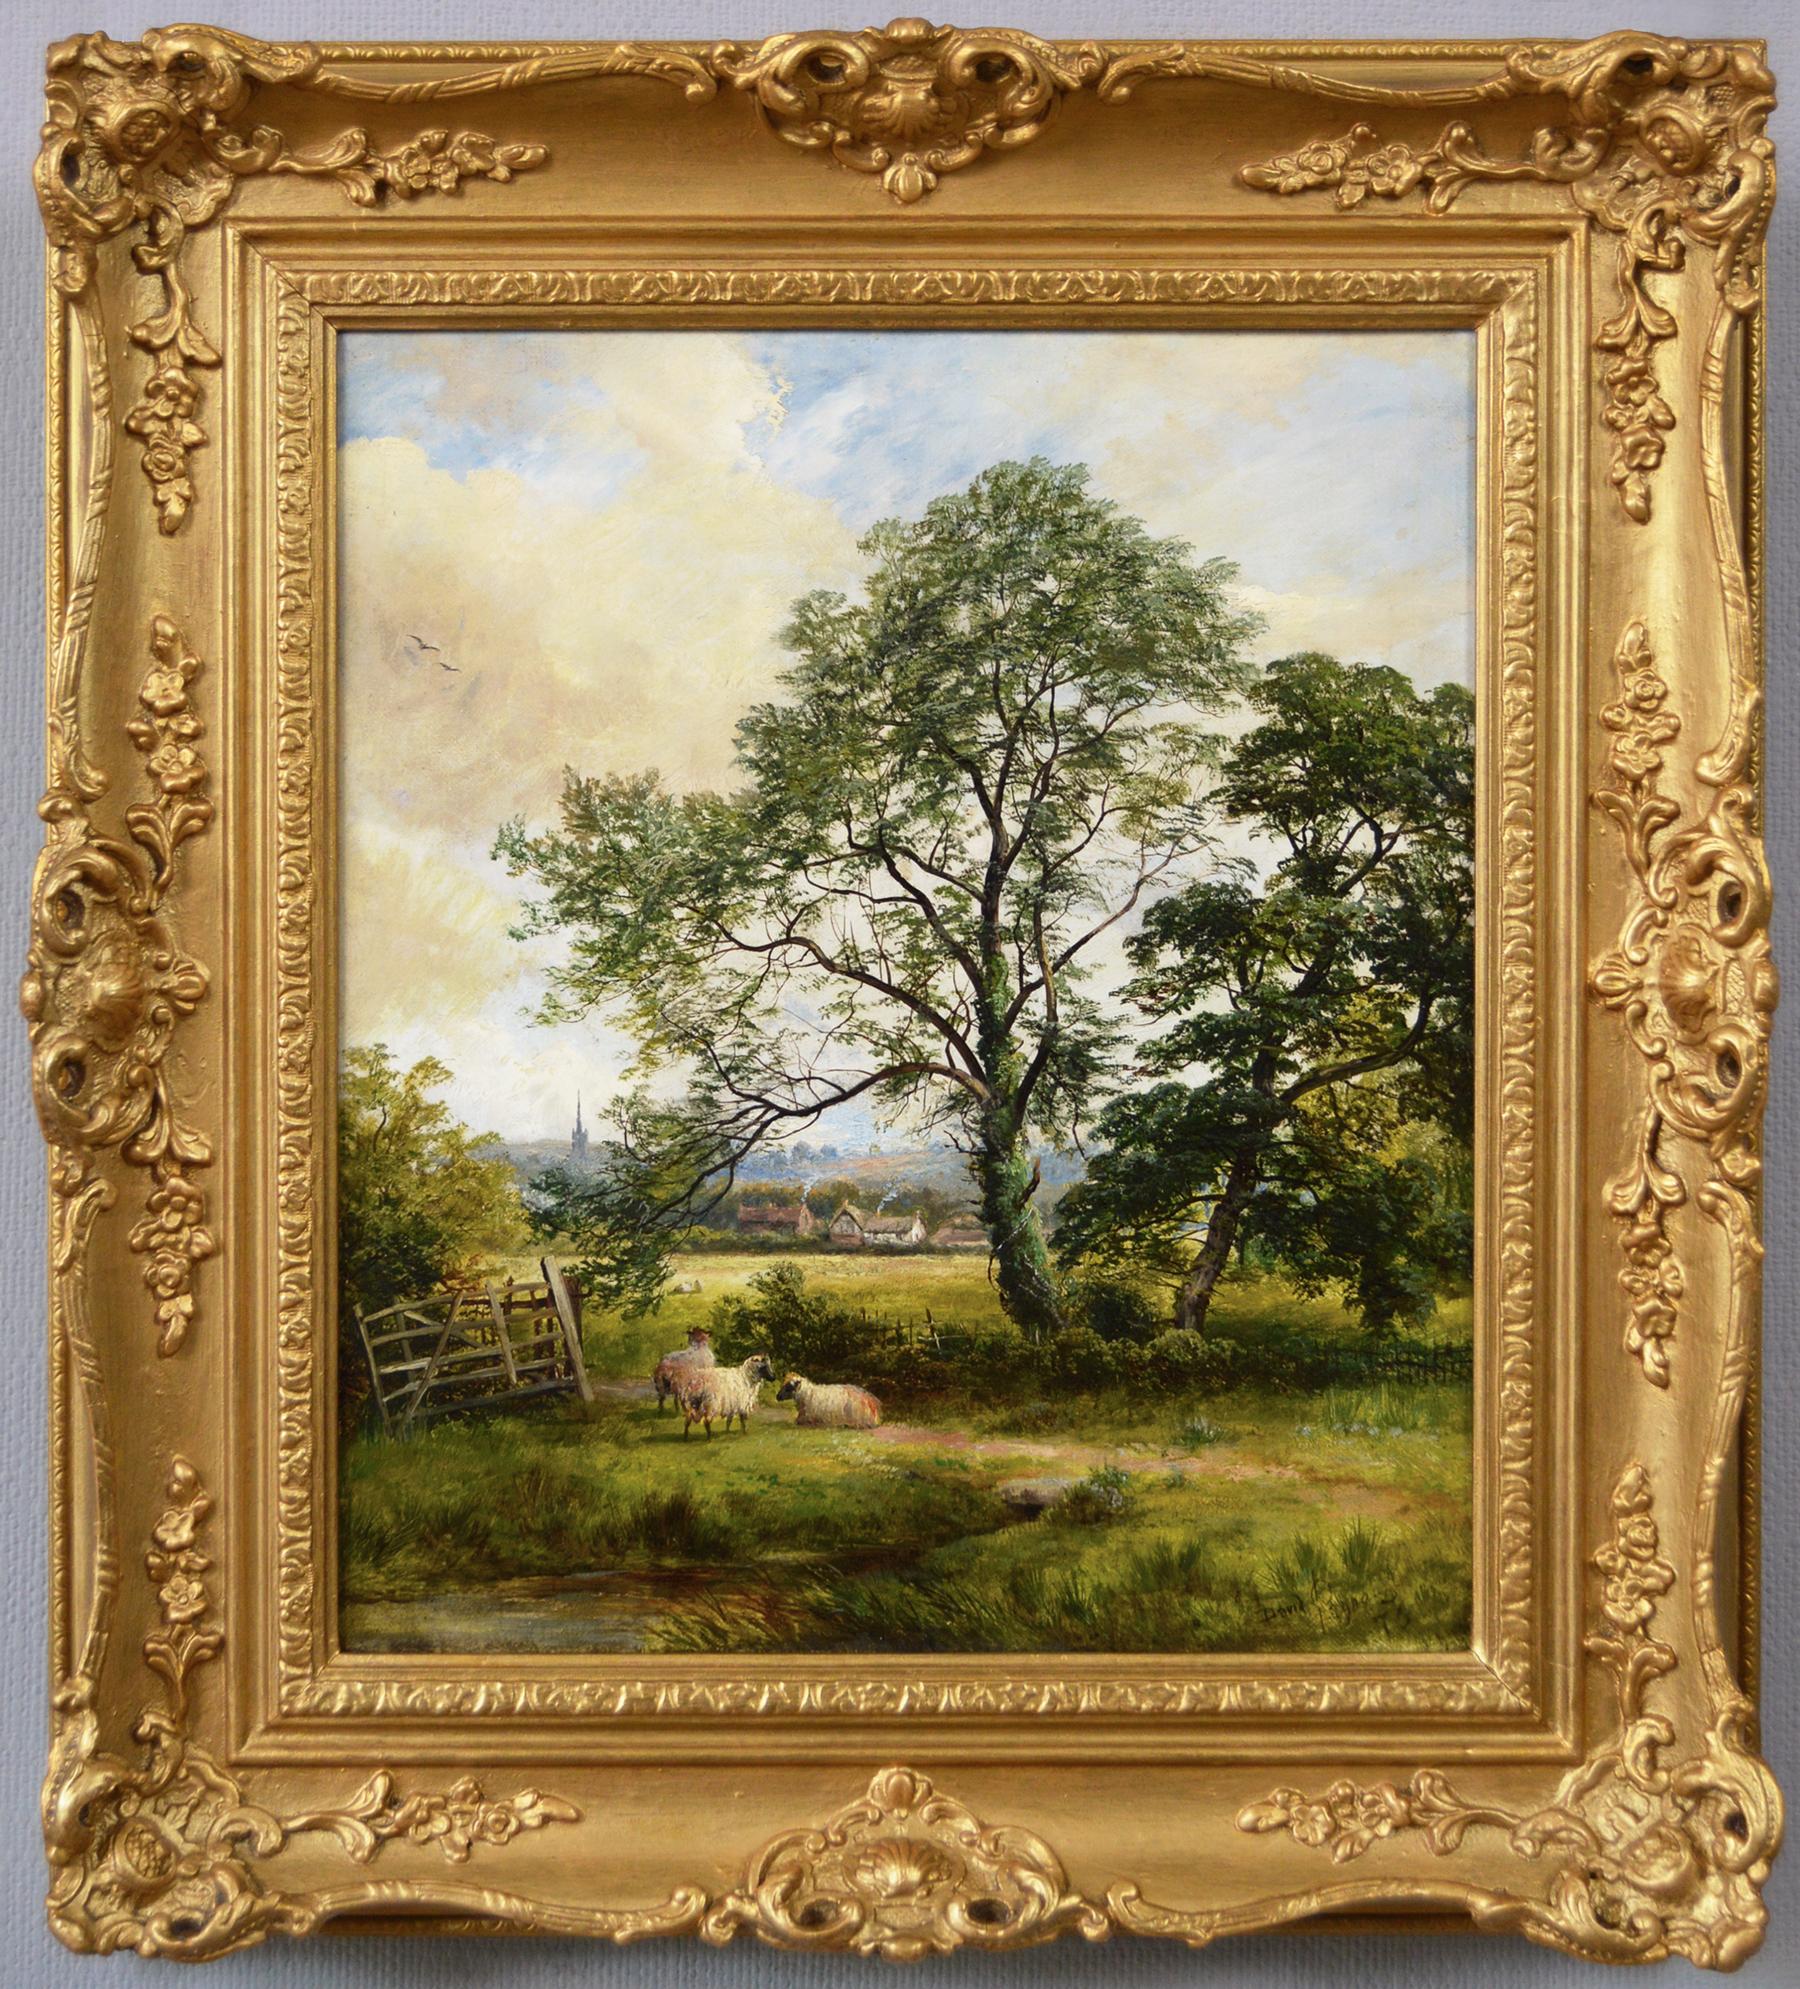 David Payne Animal Painting - 19th Century landscape oil painting of sheep by a stream